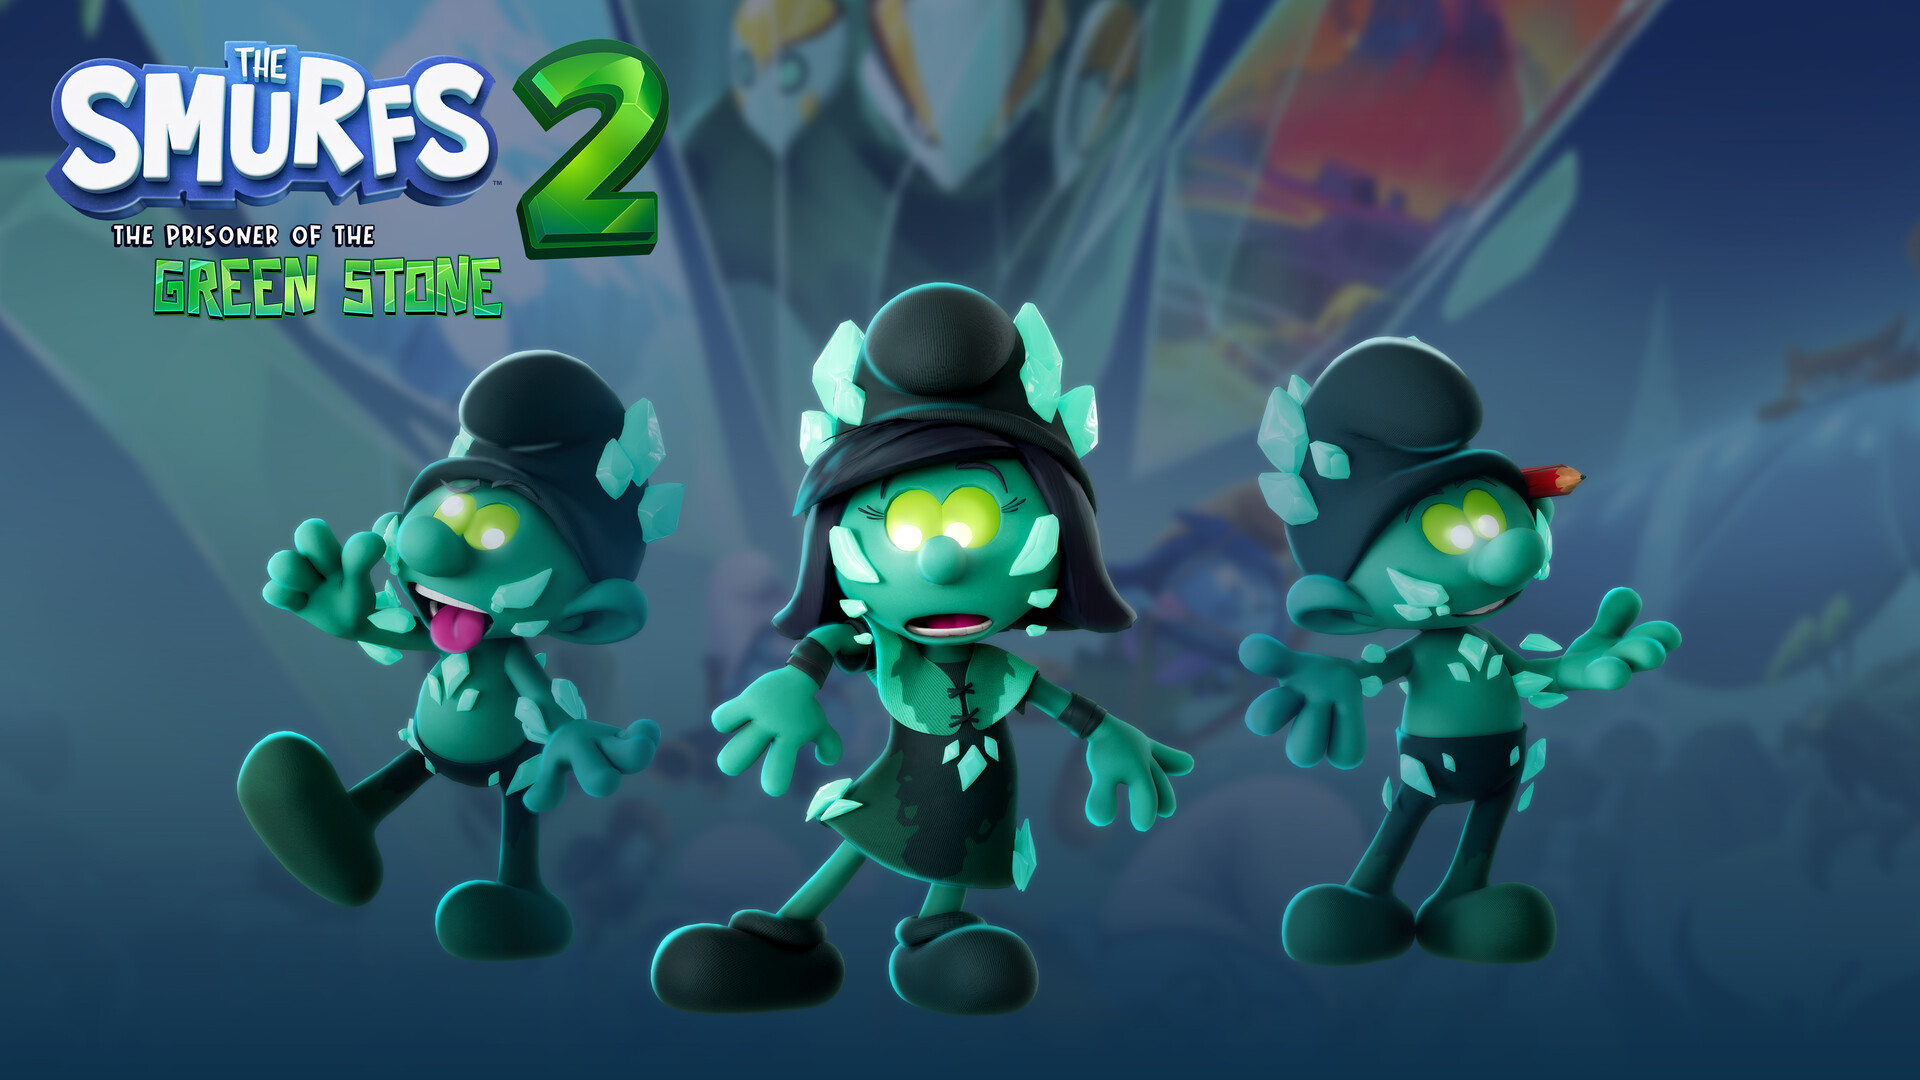 The Smurfs 2: The Prisoner of the Green Stone - Corrupted Outfit DLC GOG CD Key $1.3